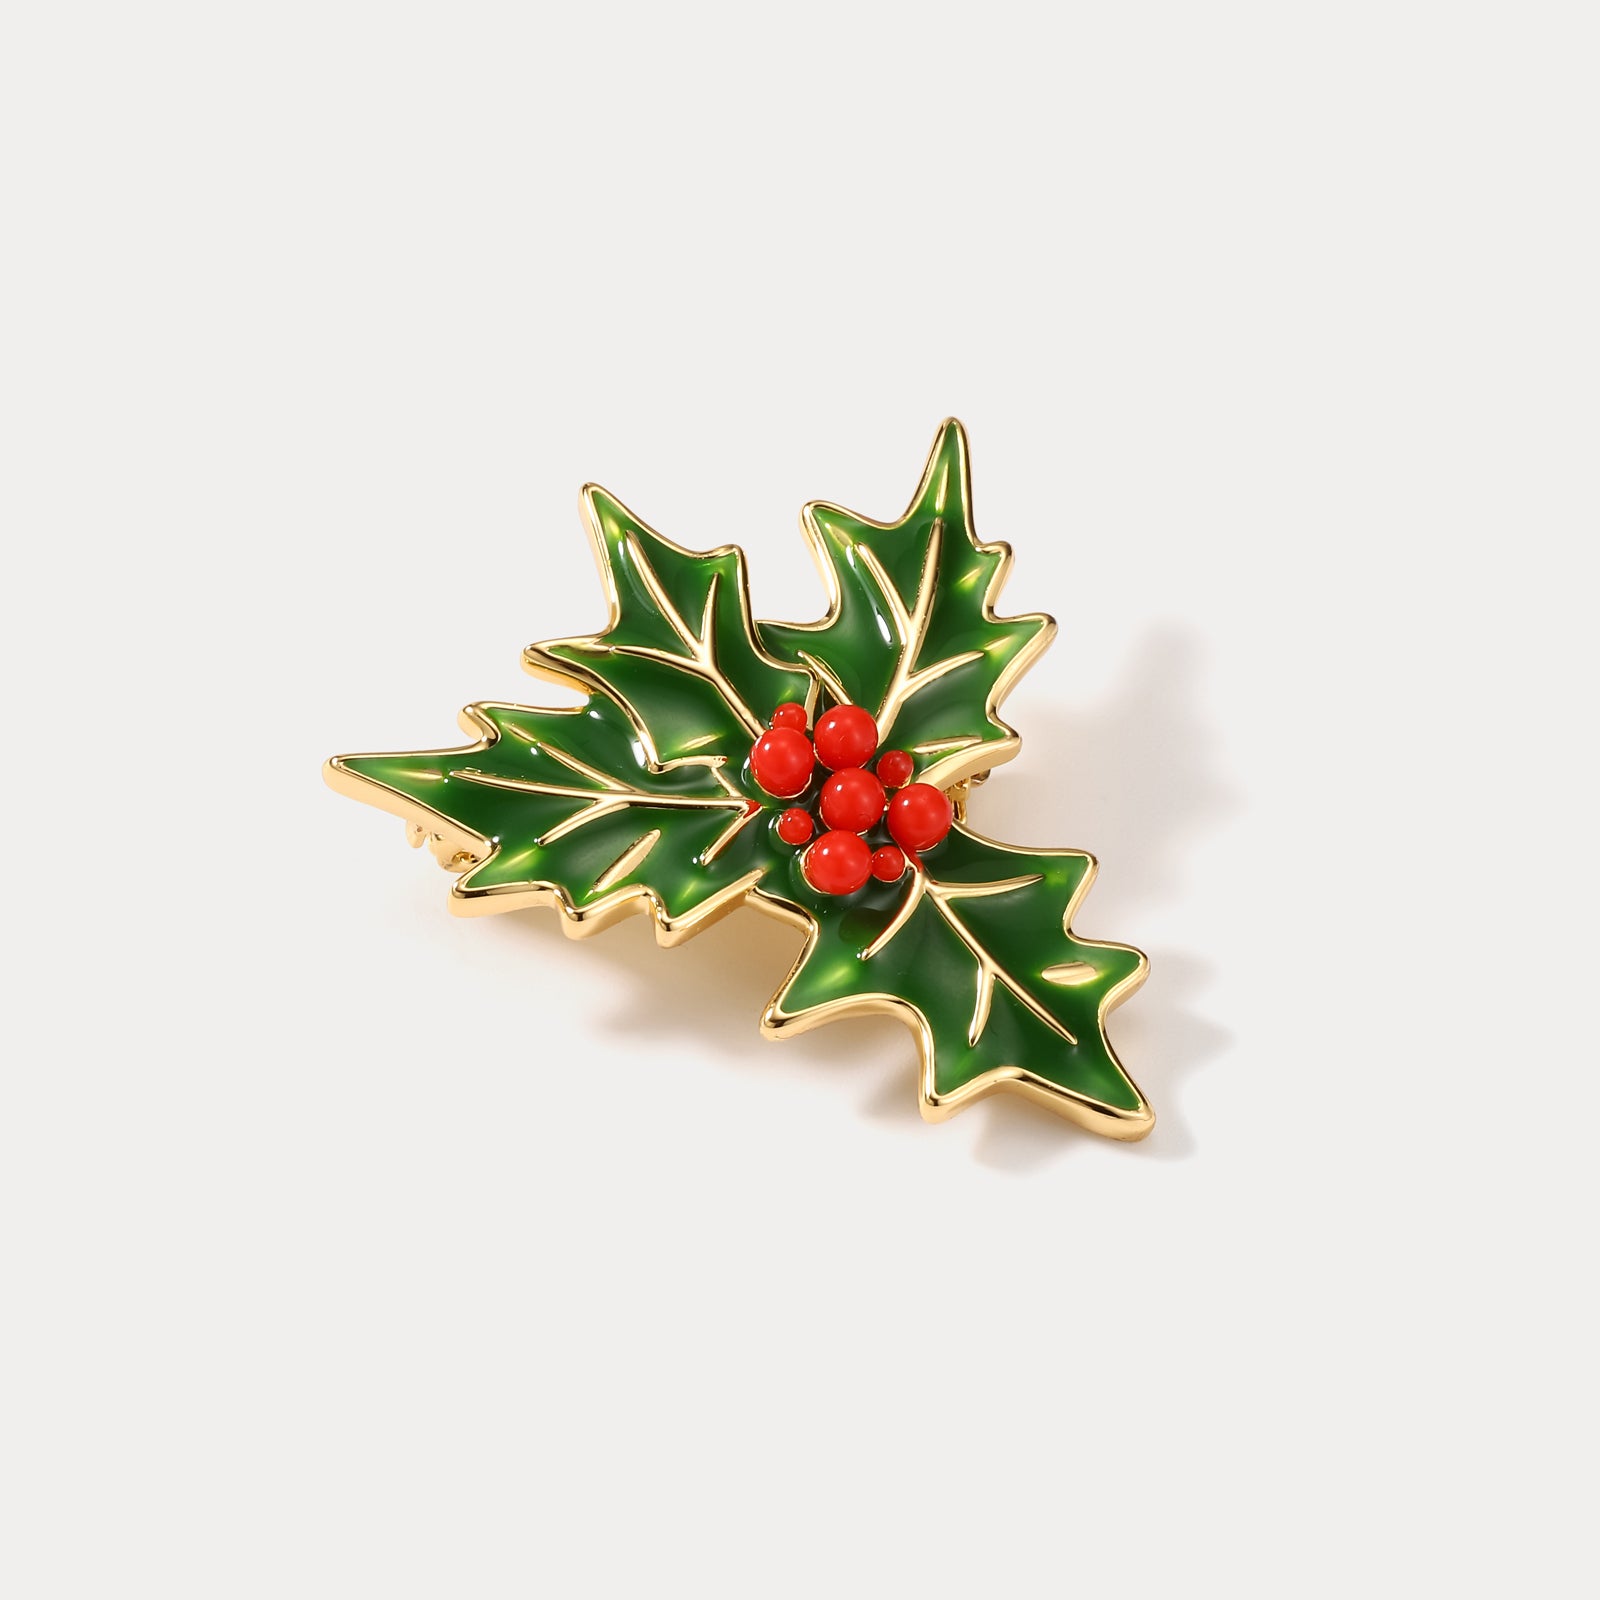 Antique Merry Christmas Holly Brooch